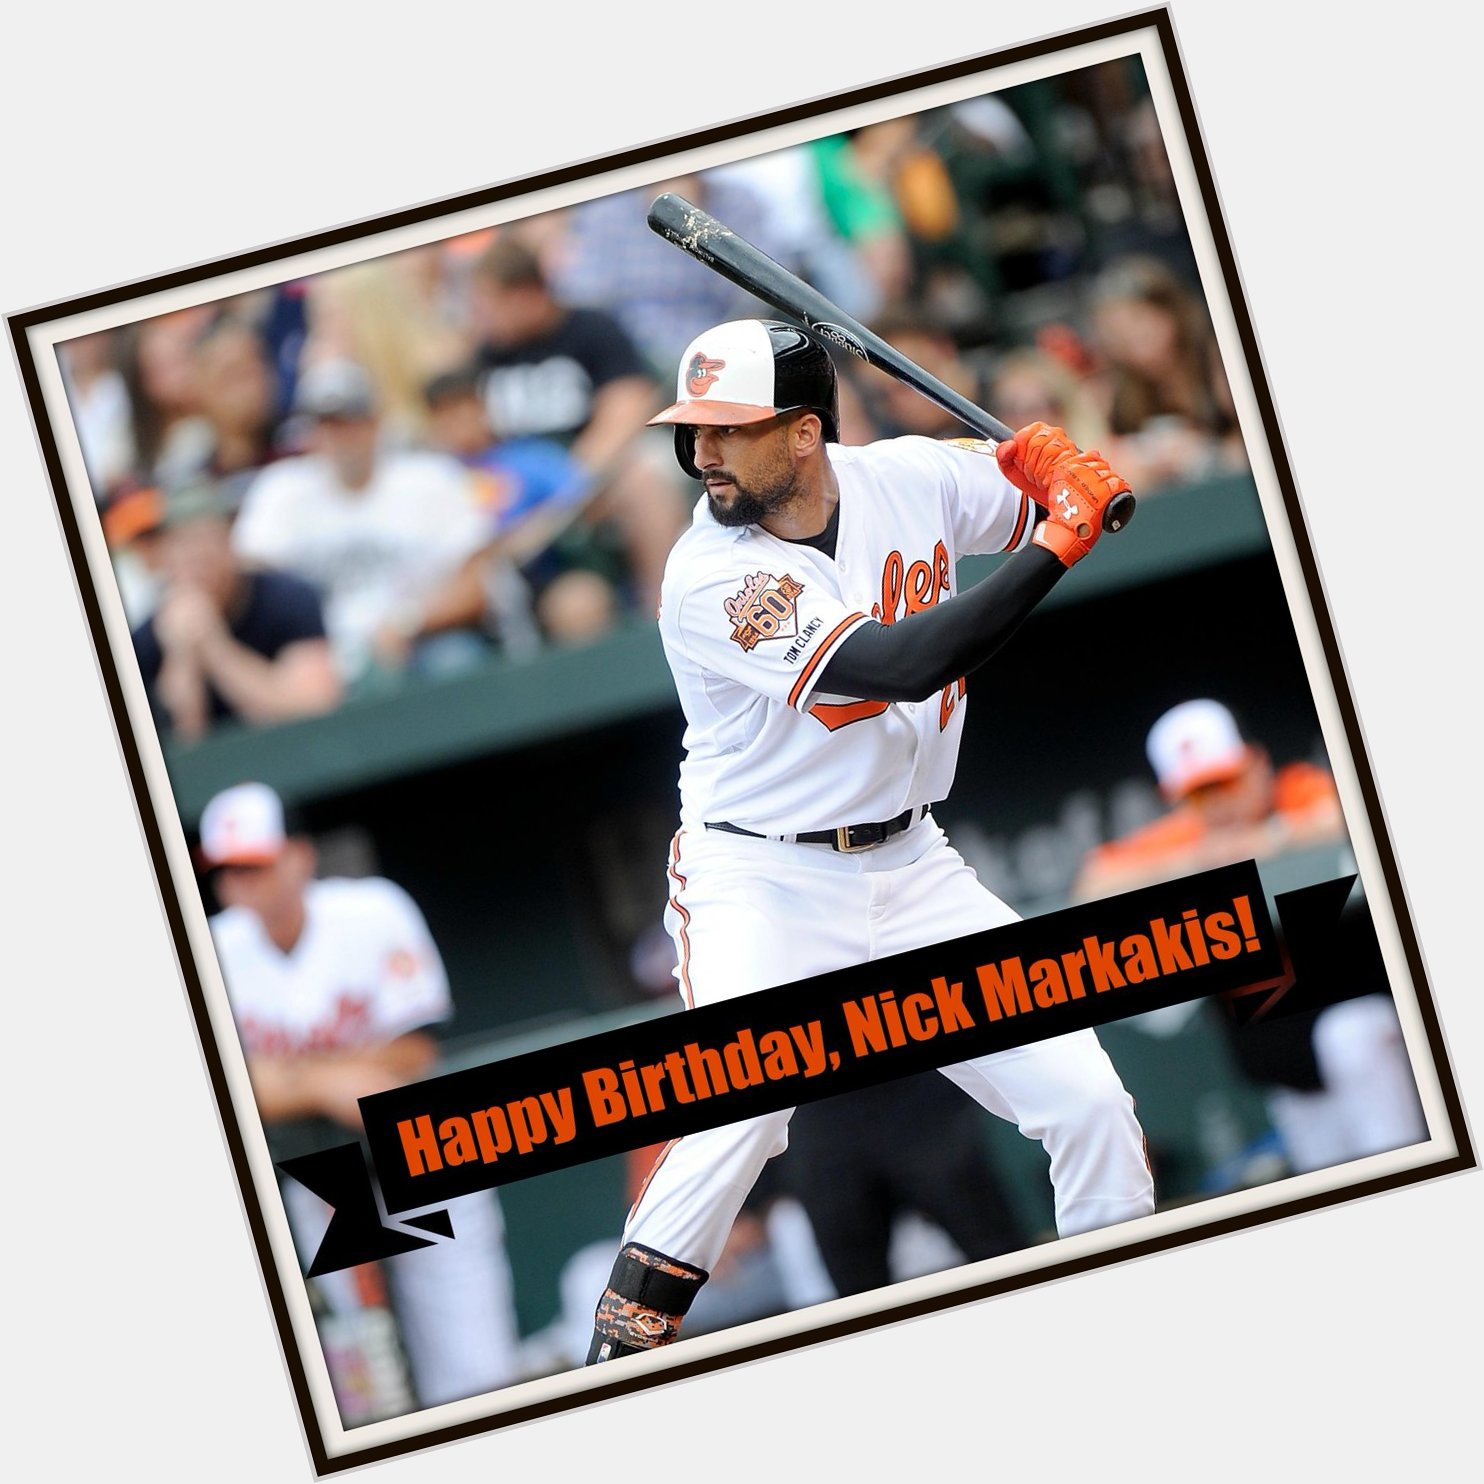 Happy Birthday, Nick Markakis! Remessage to wish him a great day. 